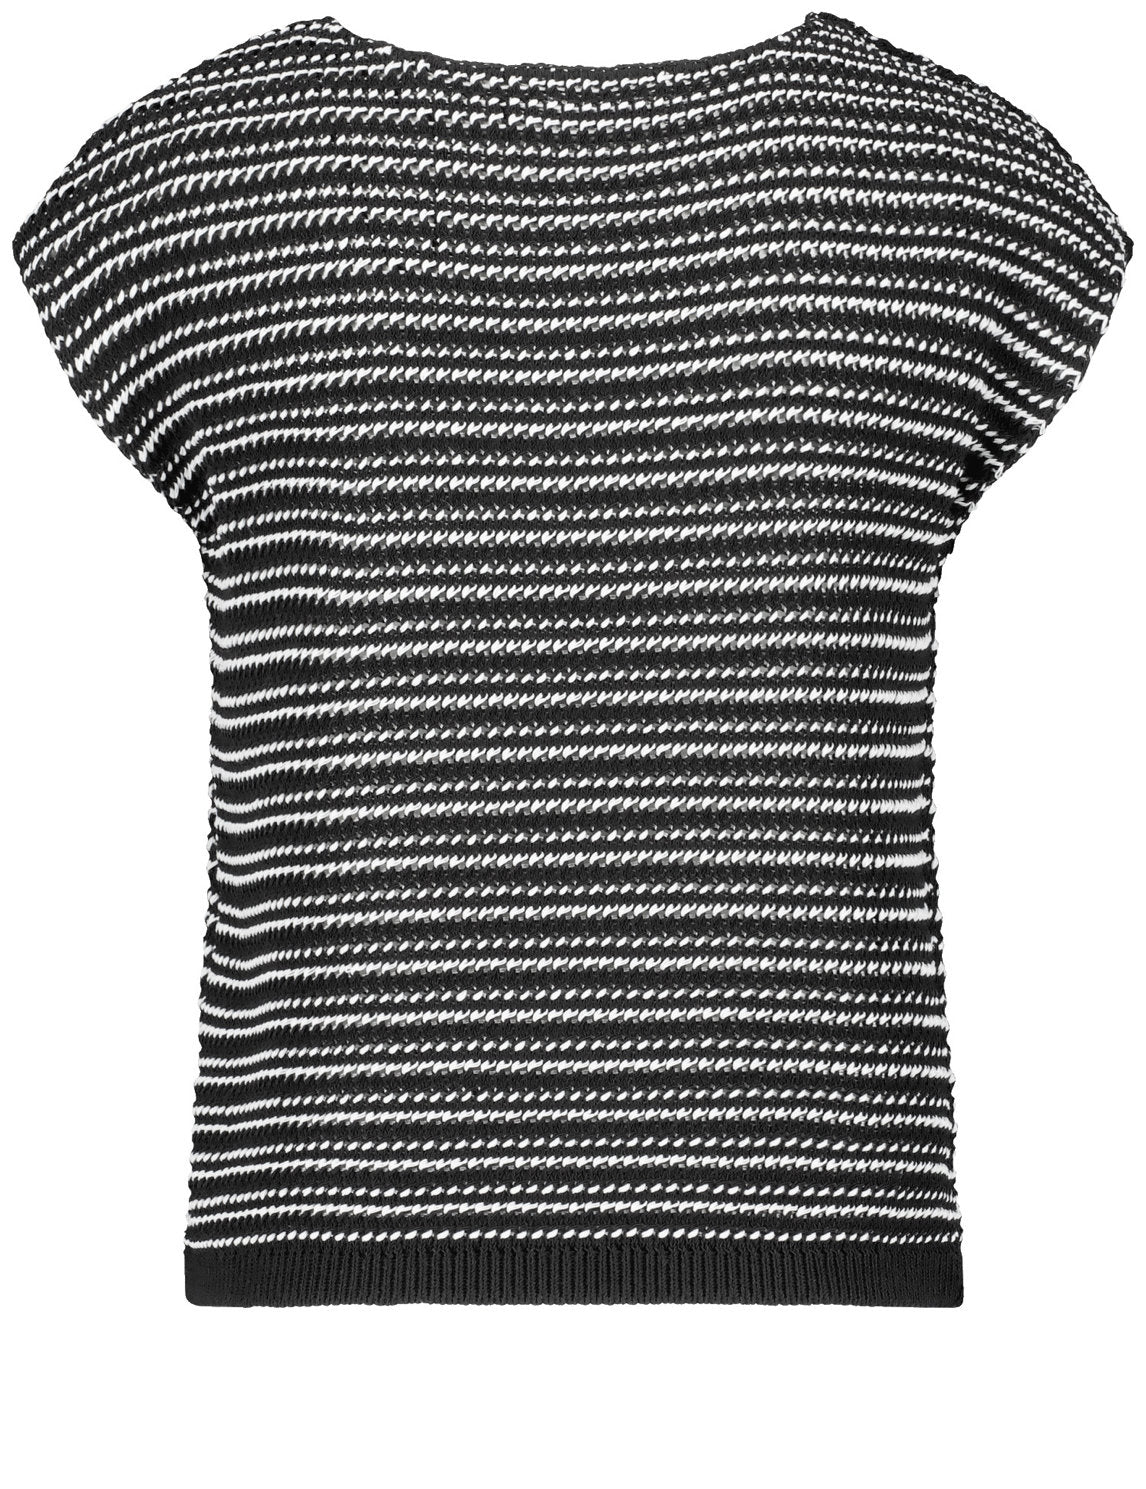 Striped Sleeveless Jumper In A Textured Knit_371021-35737_1090_08